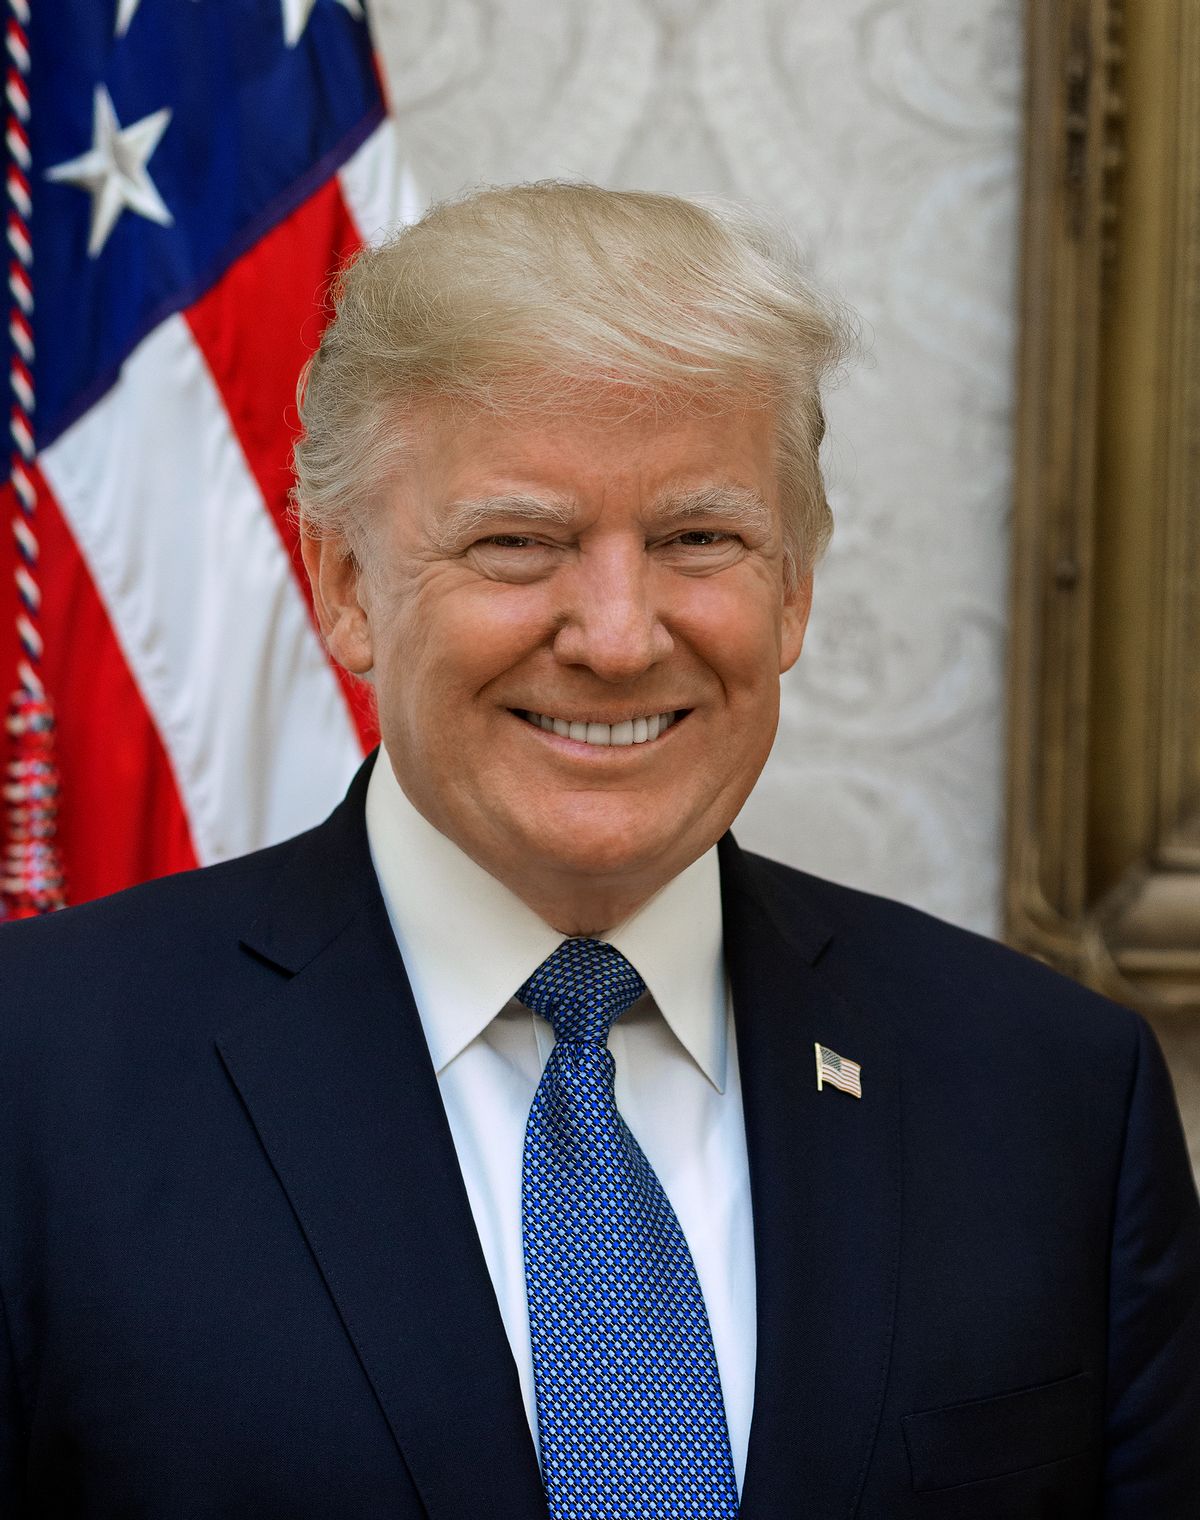 Official portrait of President Donald J. Trump, Friday, October 6, 2017.  (Official White House photo by Shealah Craighead) (Shealah Craighead / Official White House photo)